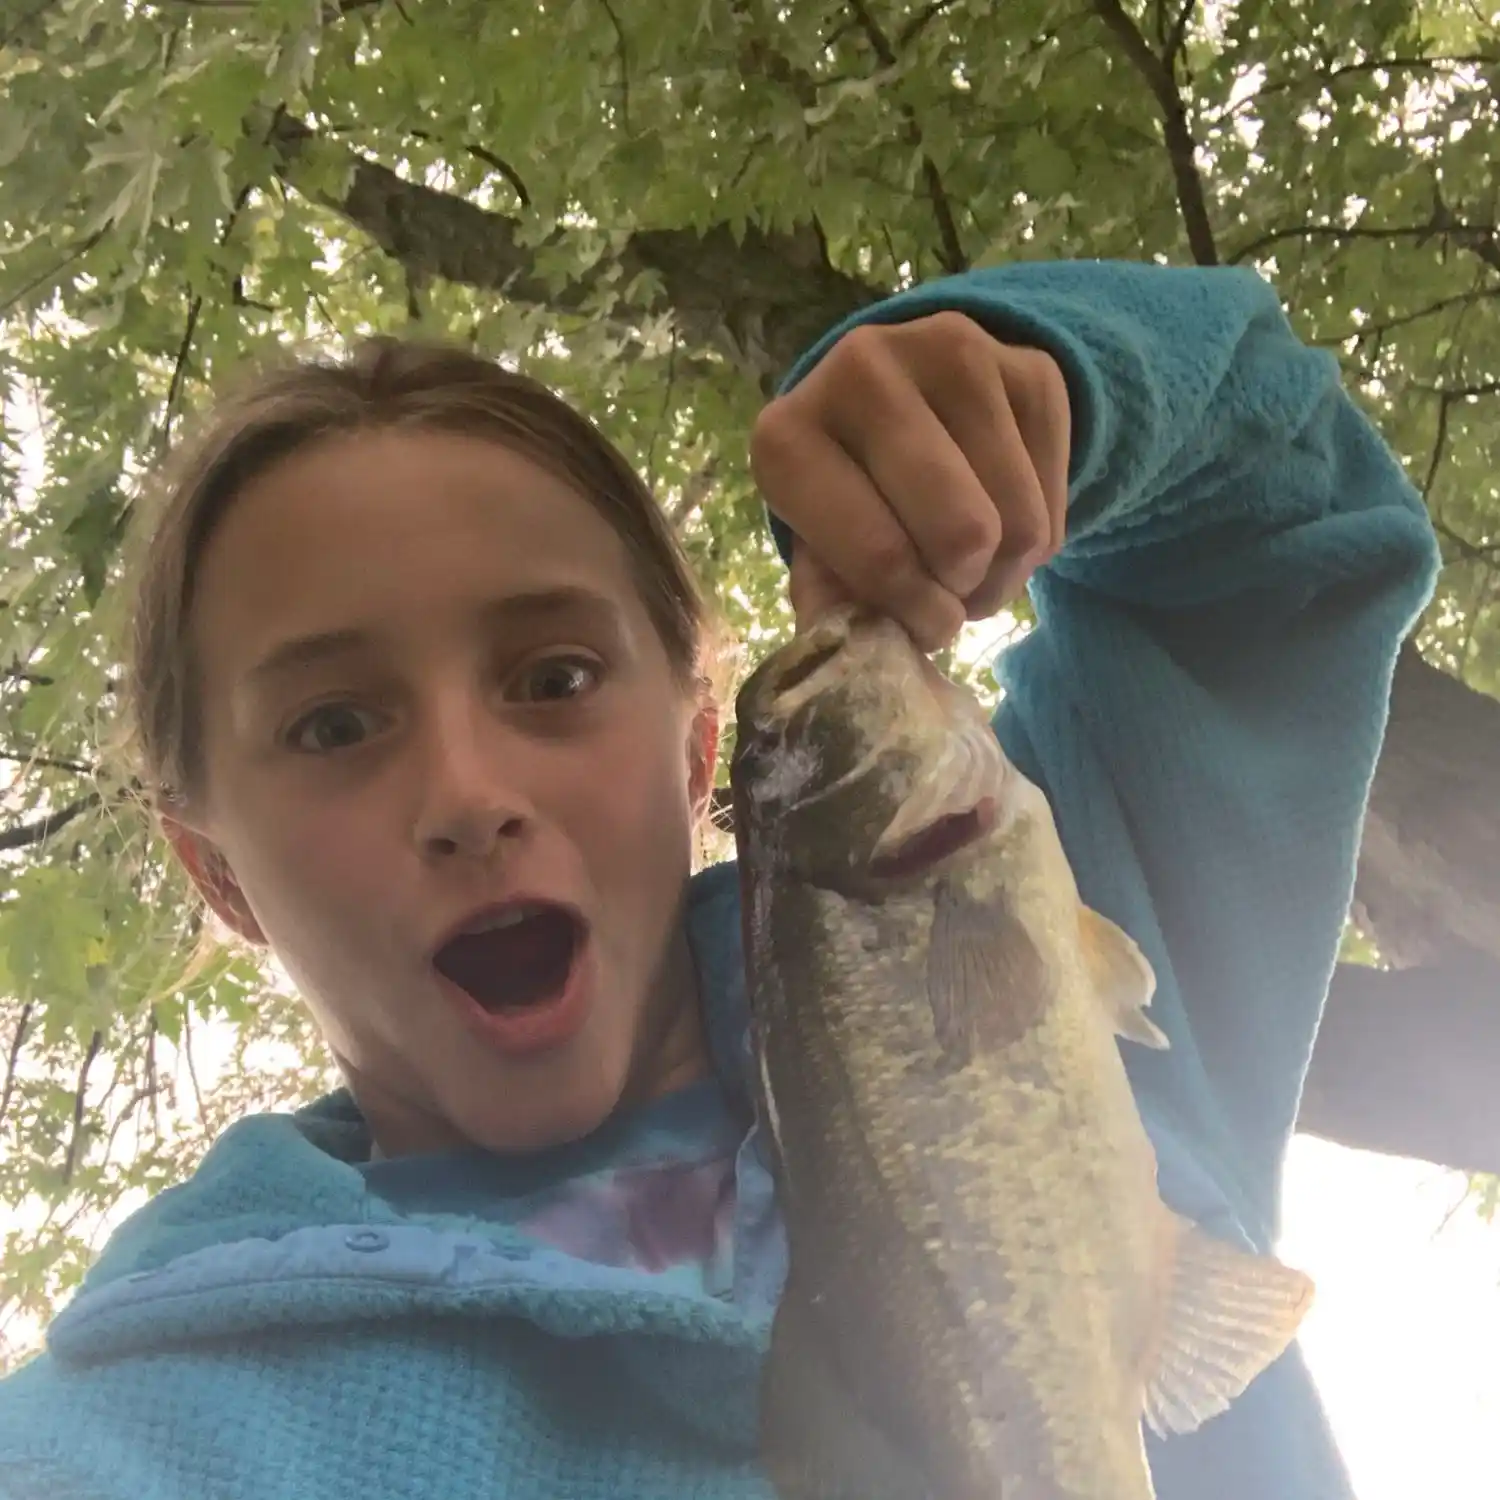 ᐅ Clare Lake fishing reports🎣• Michigan City, IN (United States) fishing